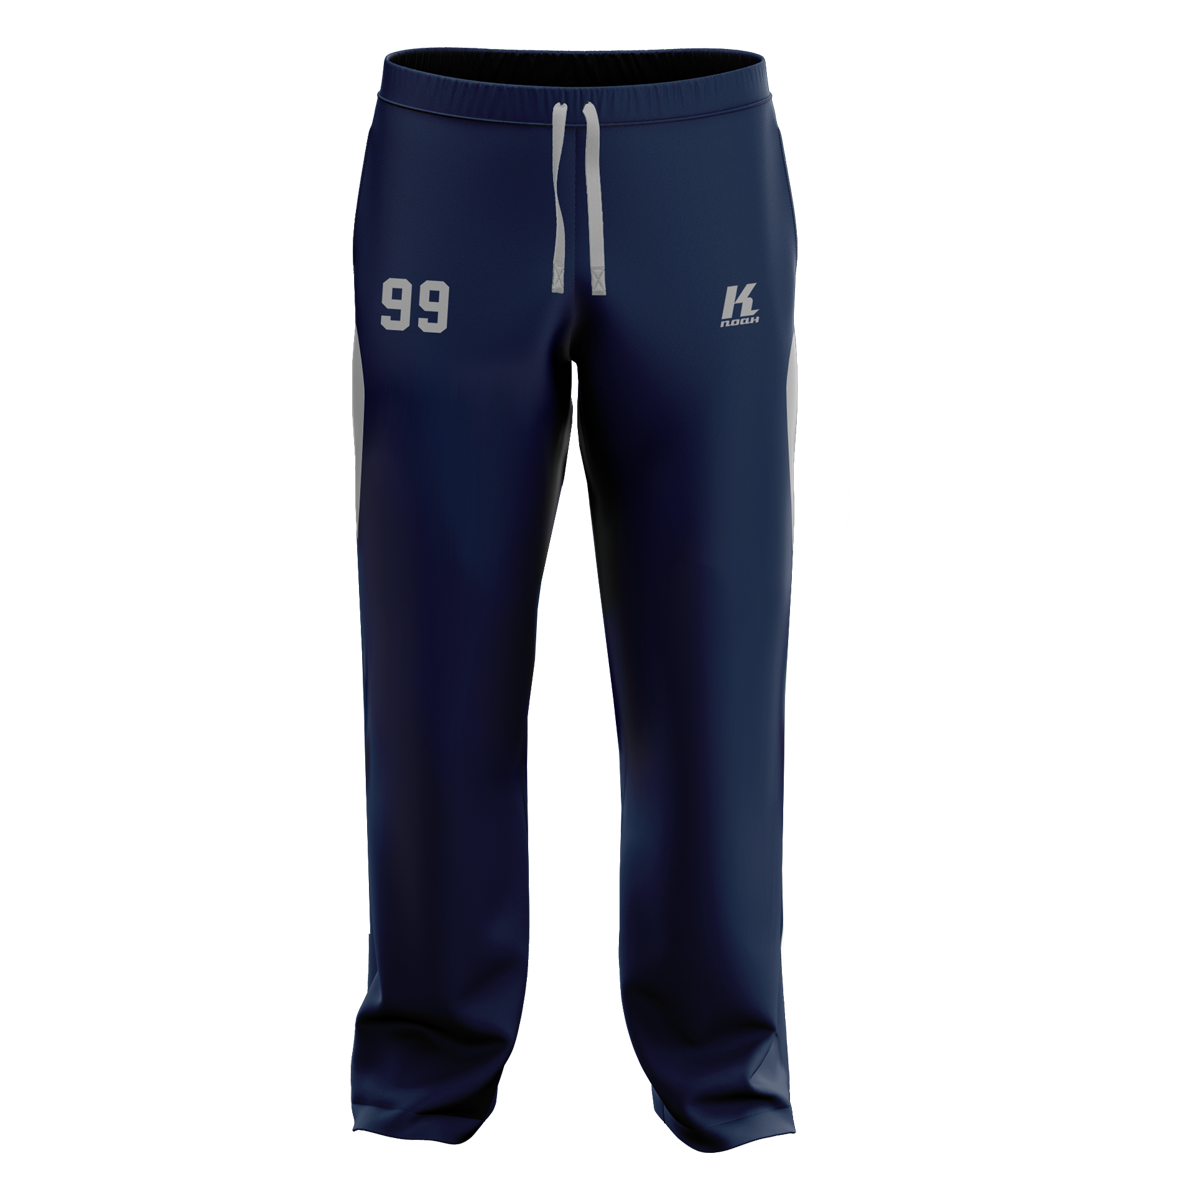 Wilddogs Signature Series Sweat Pant with Playernumber/Initials